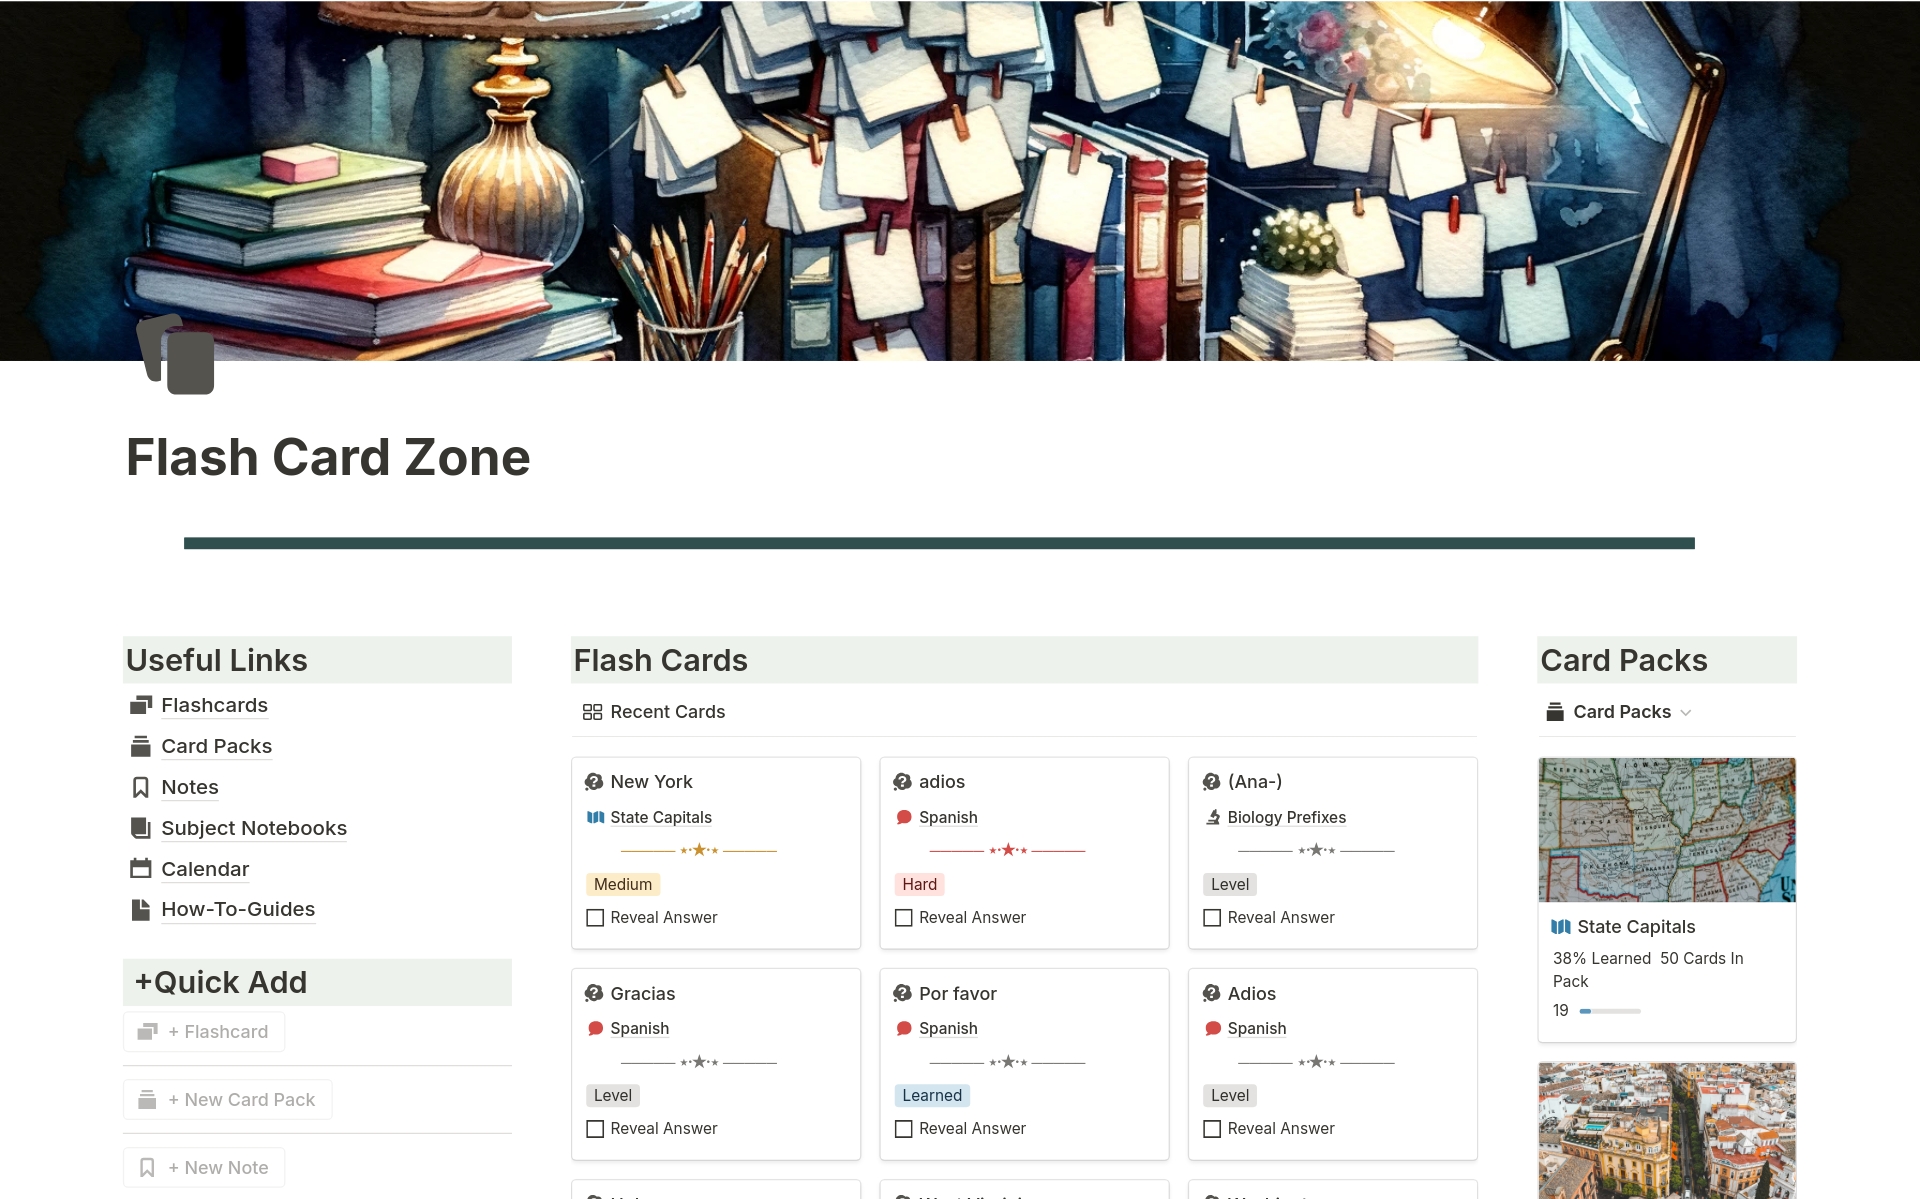 
Flashcard Zone by Origami Crane Creations: A Notion-powered study tool offering customizable flashcards, organized card packs, and integrated note-taking. Streamline your learning with themed notebooks and a comprehensive calendar. Perfect for efficient, organized studying!